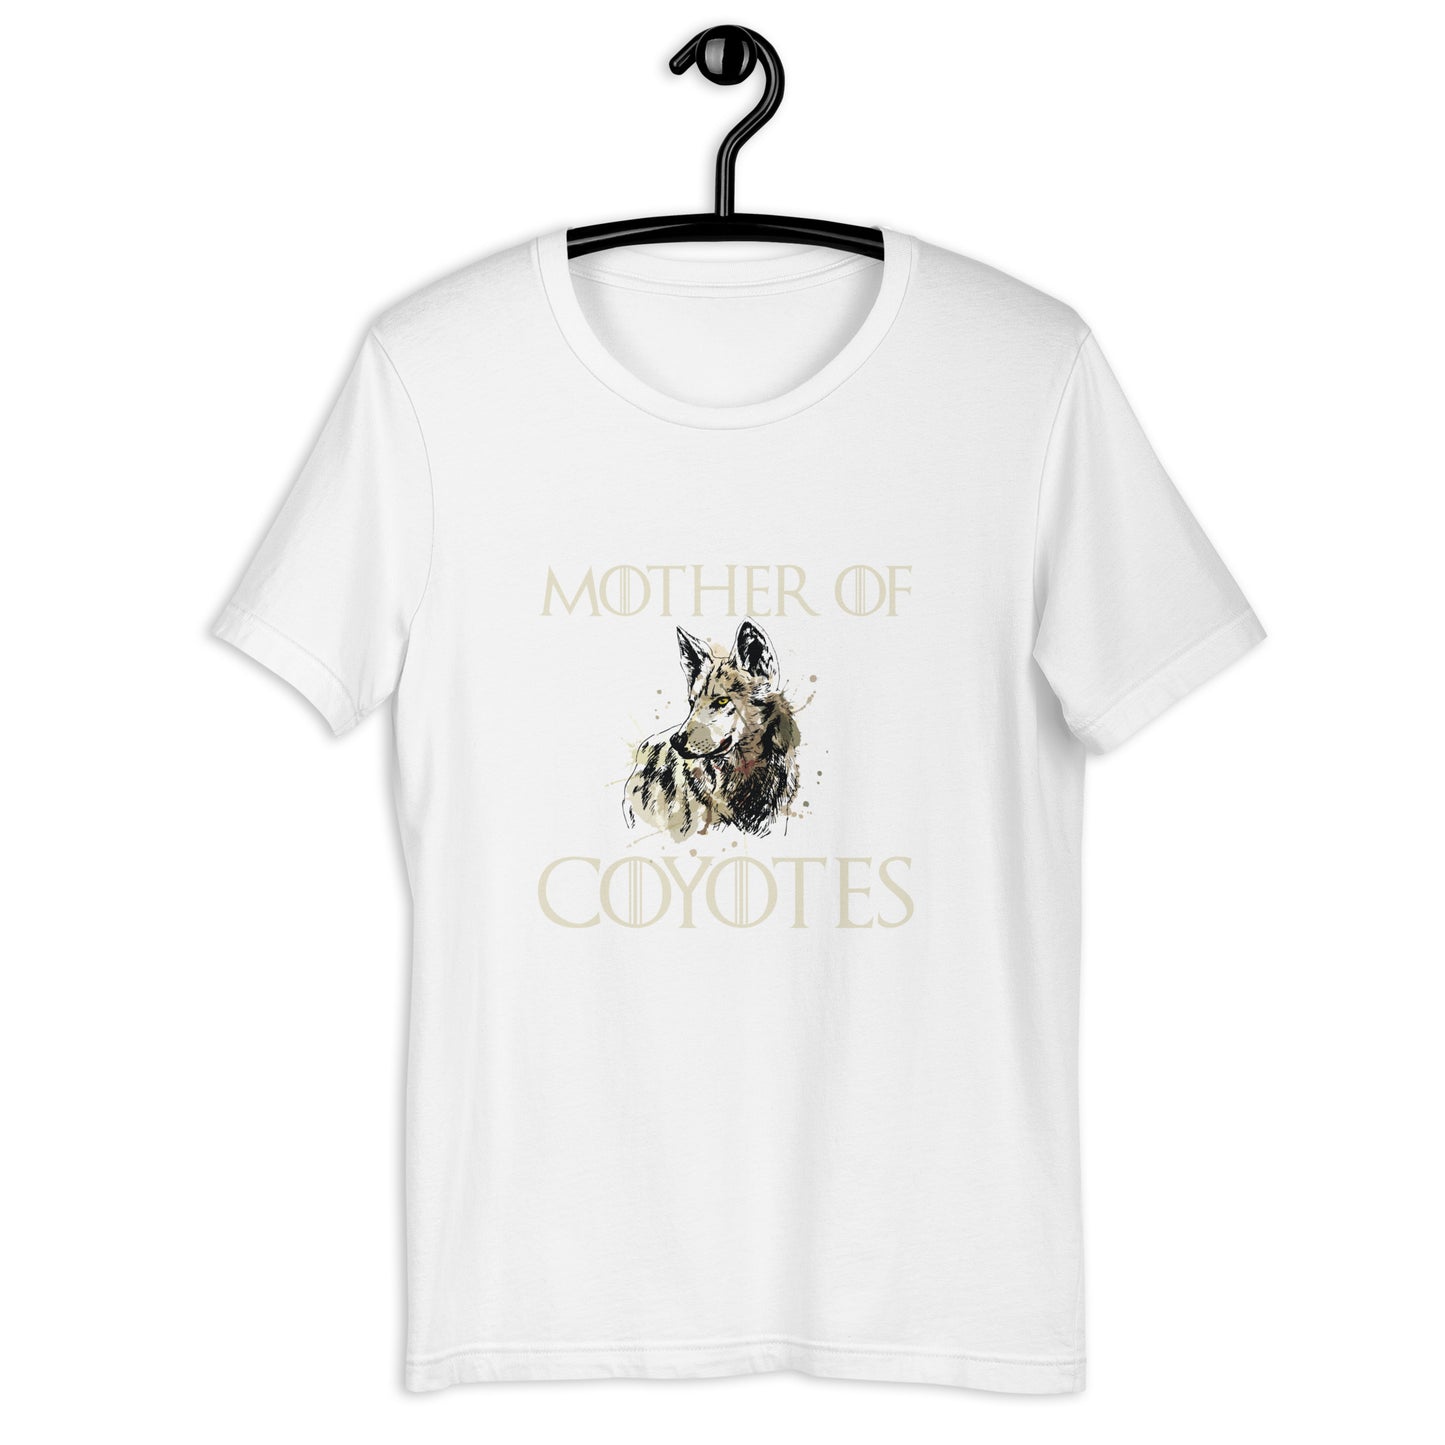 MOTHER OF COYOTES - Unisex t-shirt